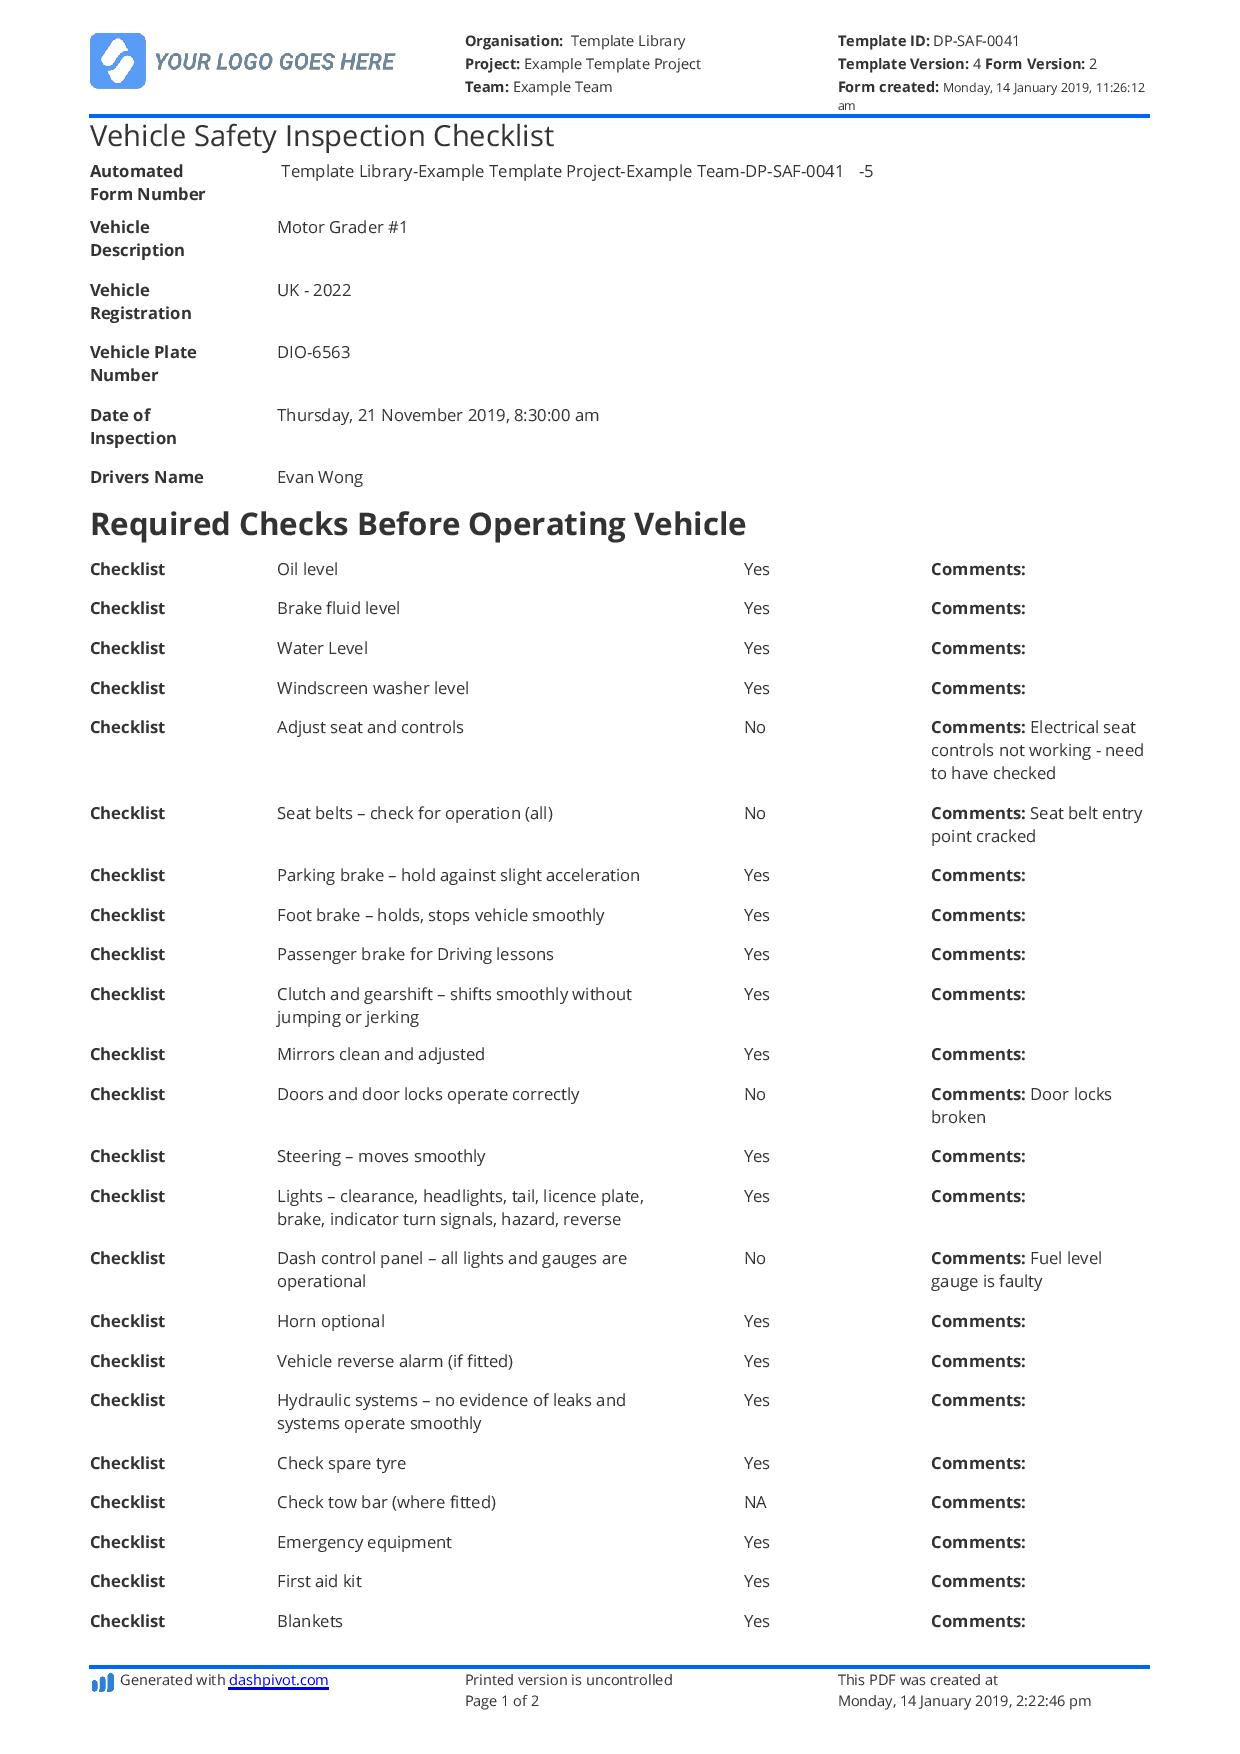 Vehicle Safety Inspection Checklist template - Free and customisable Within Vehicle Safety Inspection Checklist Template For Vehicle Safety Inspection Checklist Template